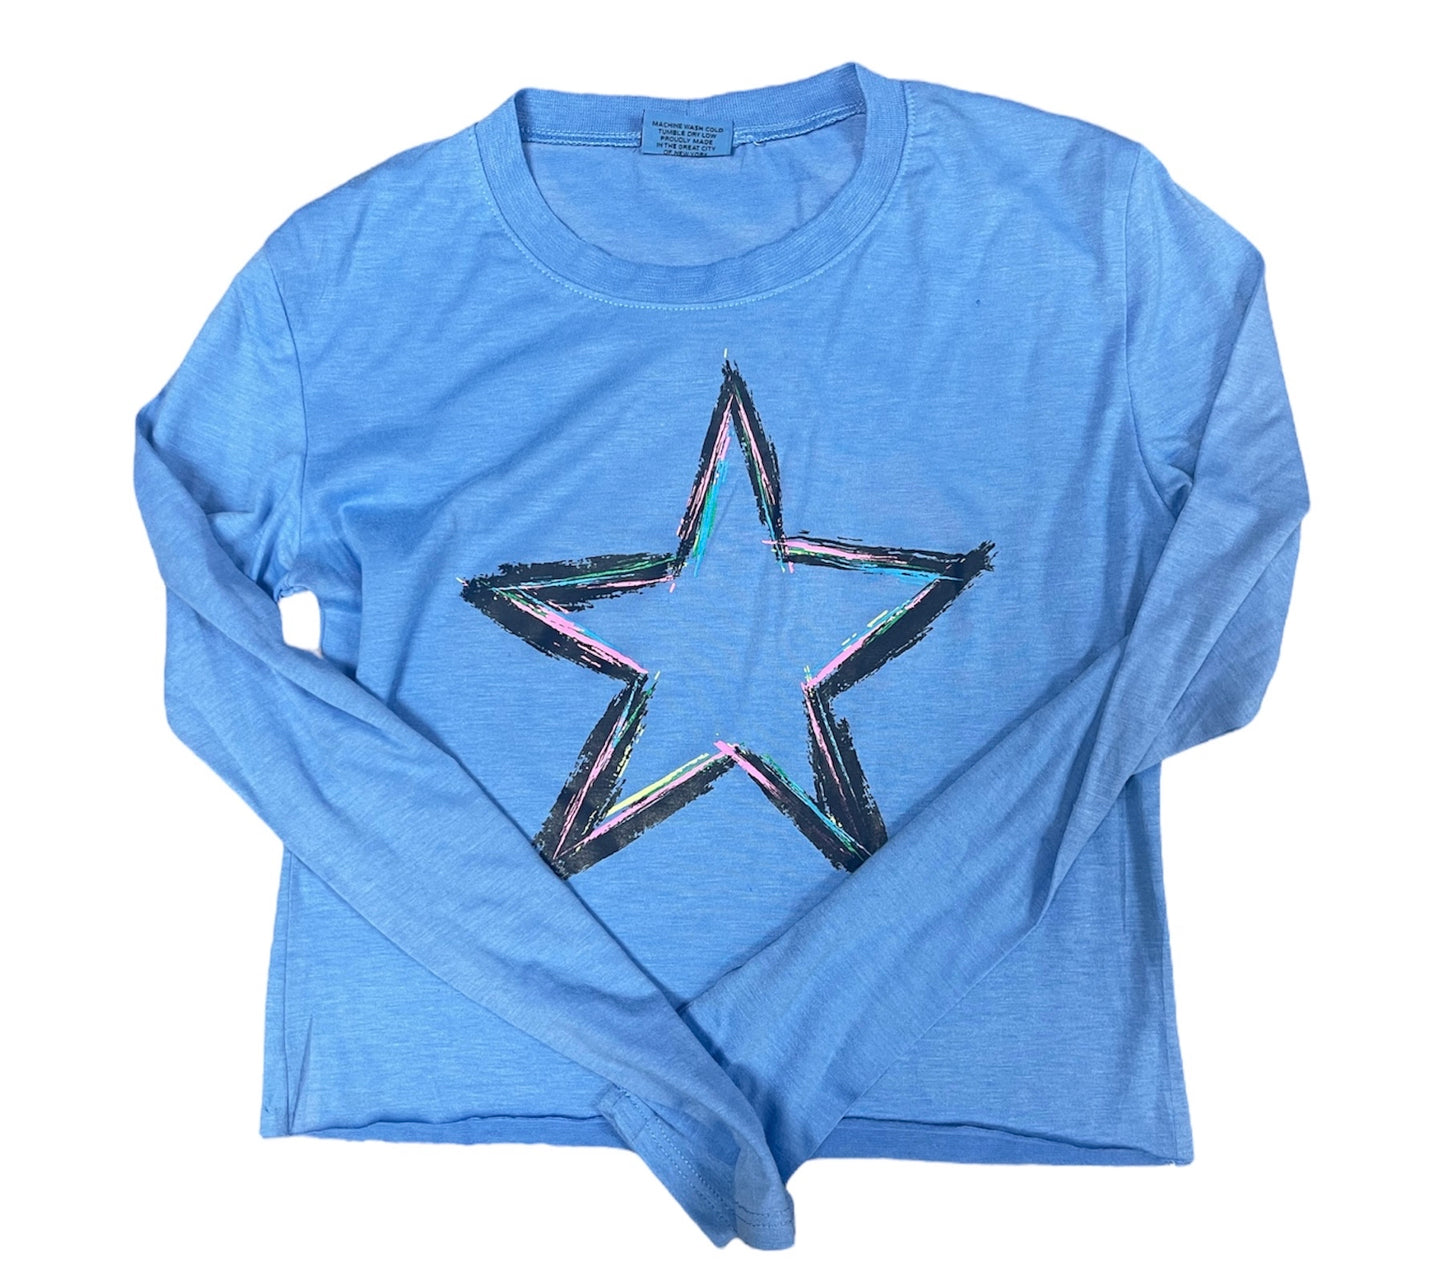 Blue L/S with neon Star